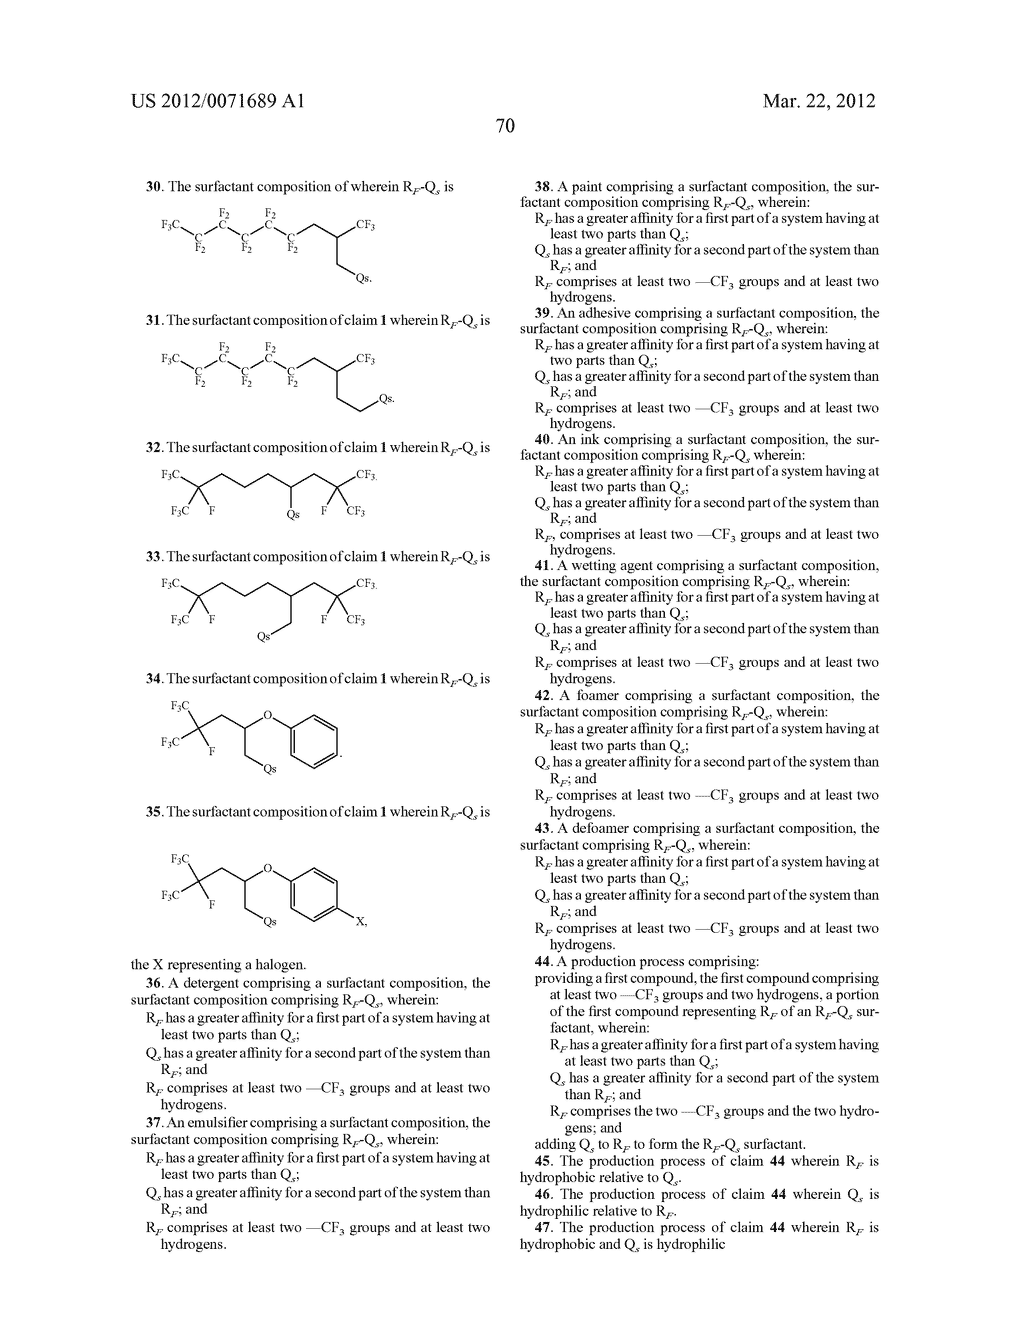 PRODUCTION PROCESSES AND SYSTEMS, COMPOSITIONS, SURFACTANTS, MONOMER     UNITS, METAL COMPLEXES, PHOSPHATE ESTERS, GLYCOLS, AQUEOUS FILM FORMING     FOAMS, AND FOAM STABILIZERS - diagram, schematic, and image 80